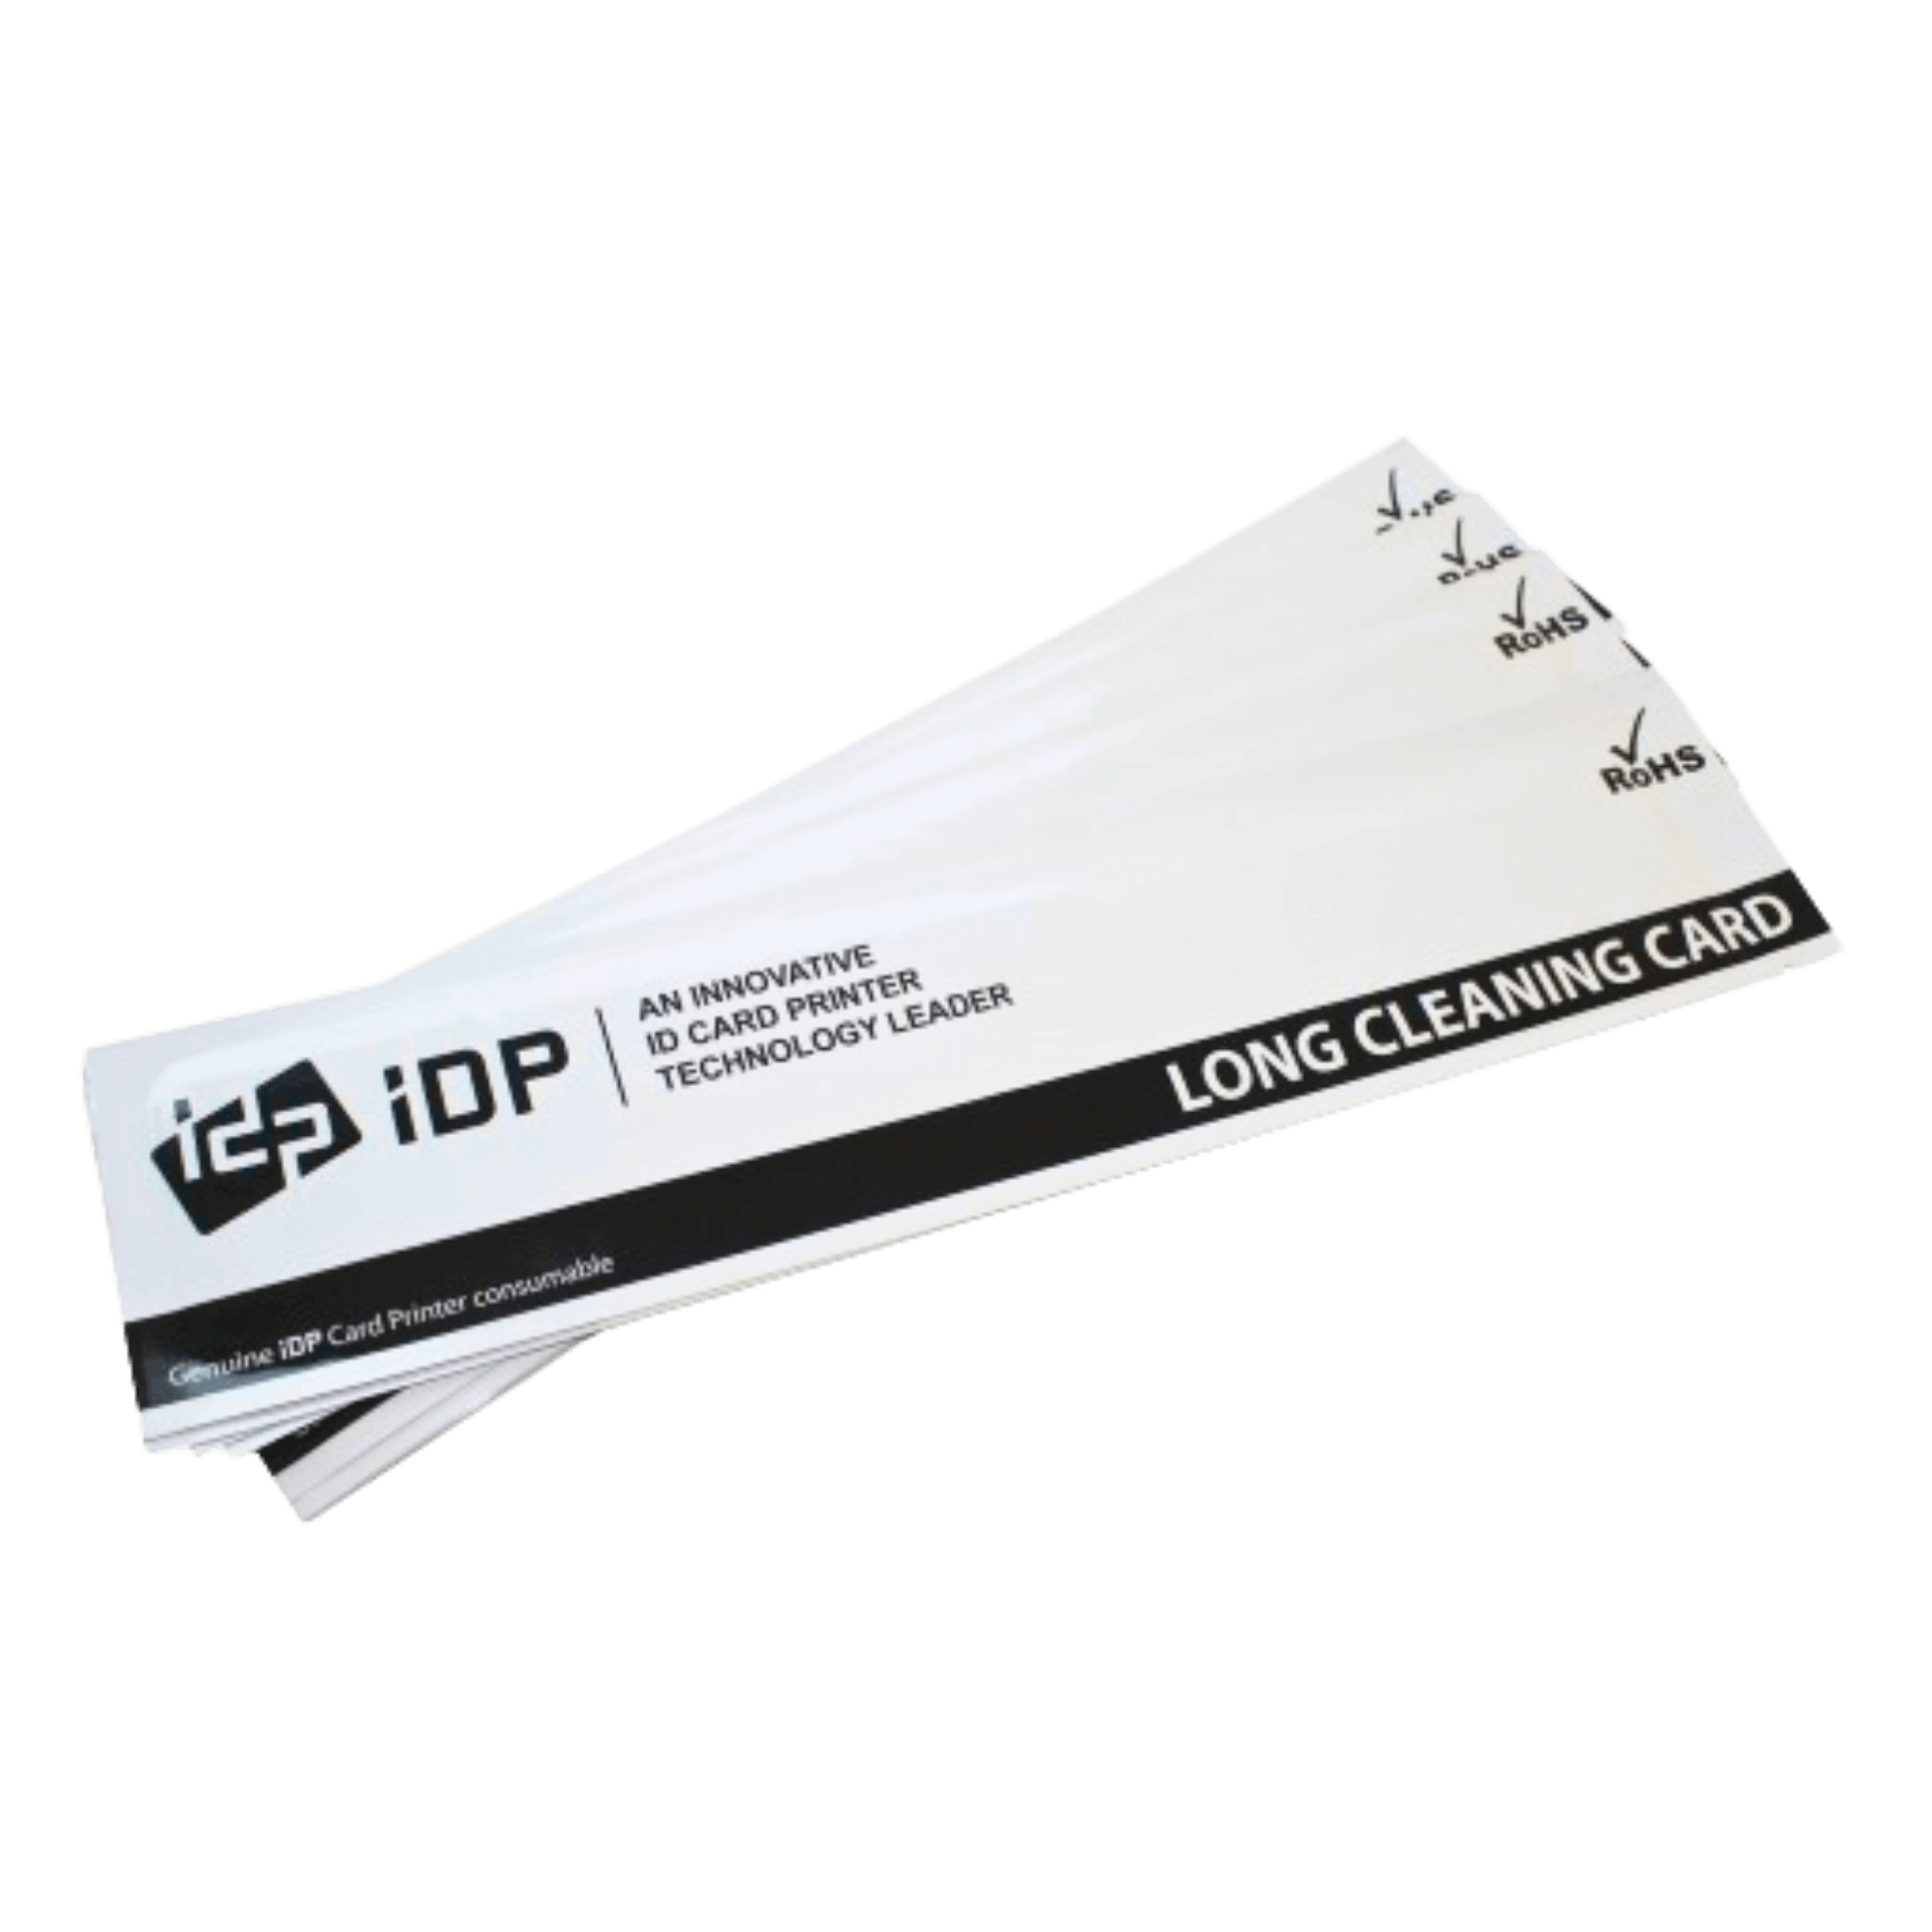 IDP Smart 659909 Long Cleaning Card Kit, 10 Pack